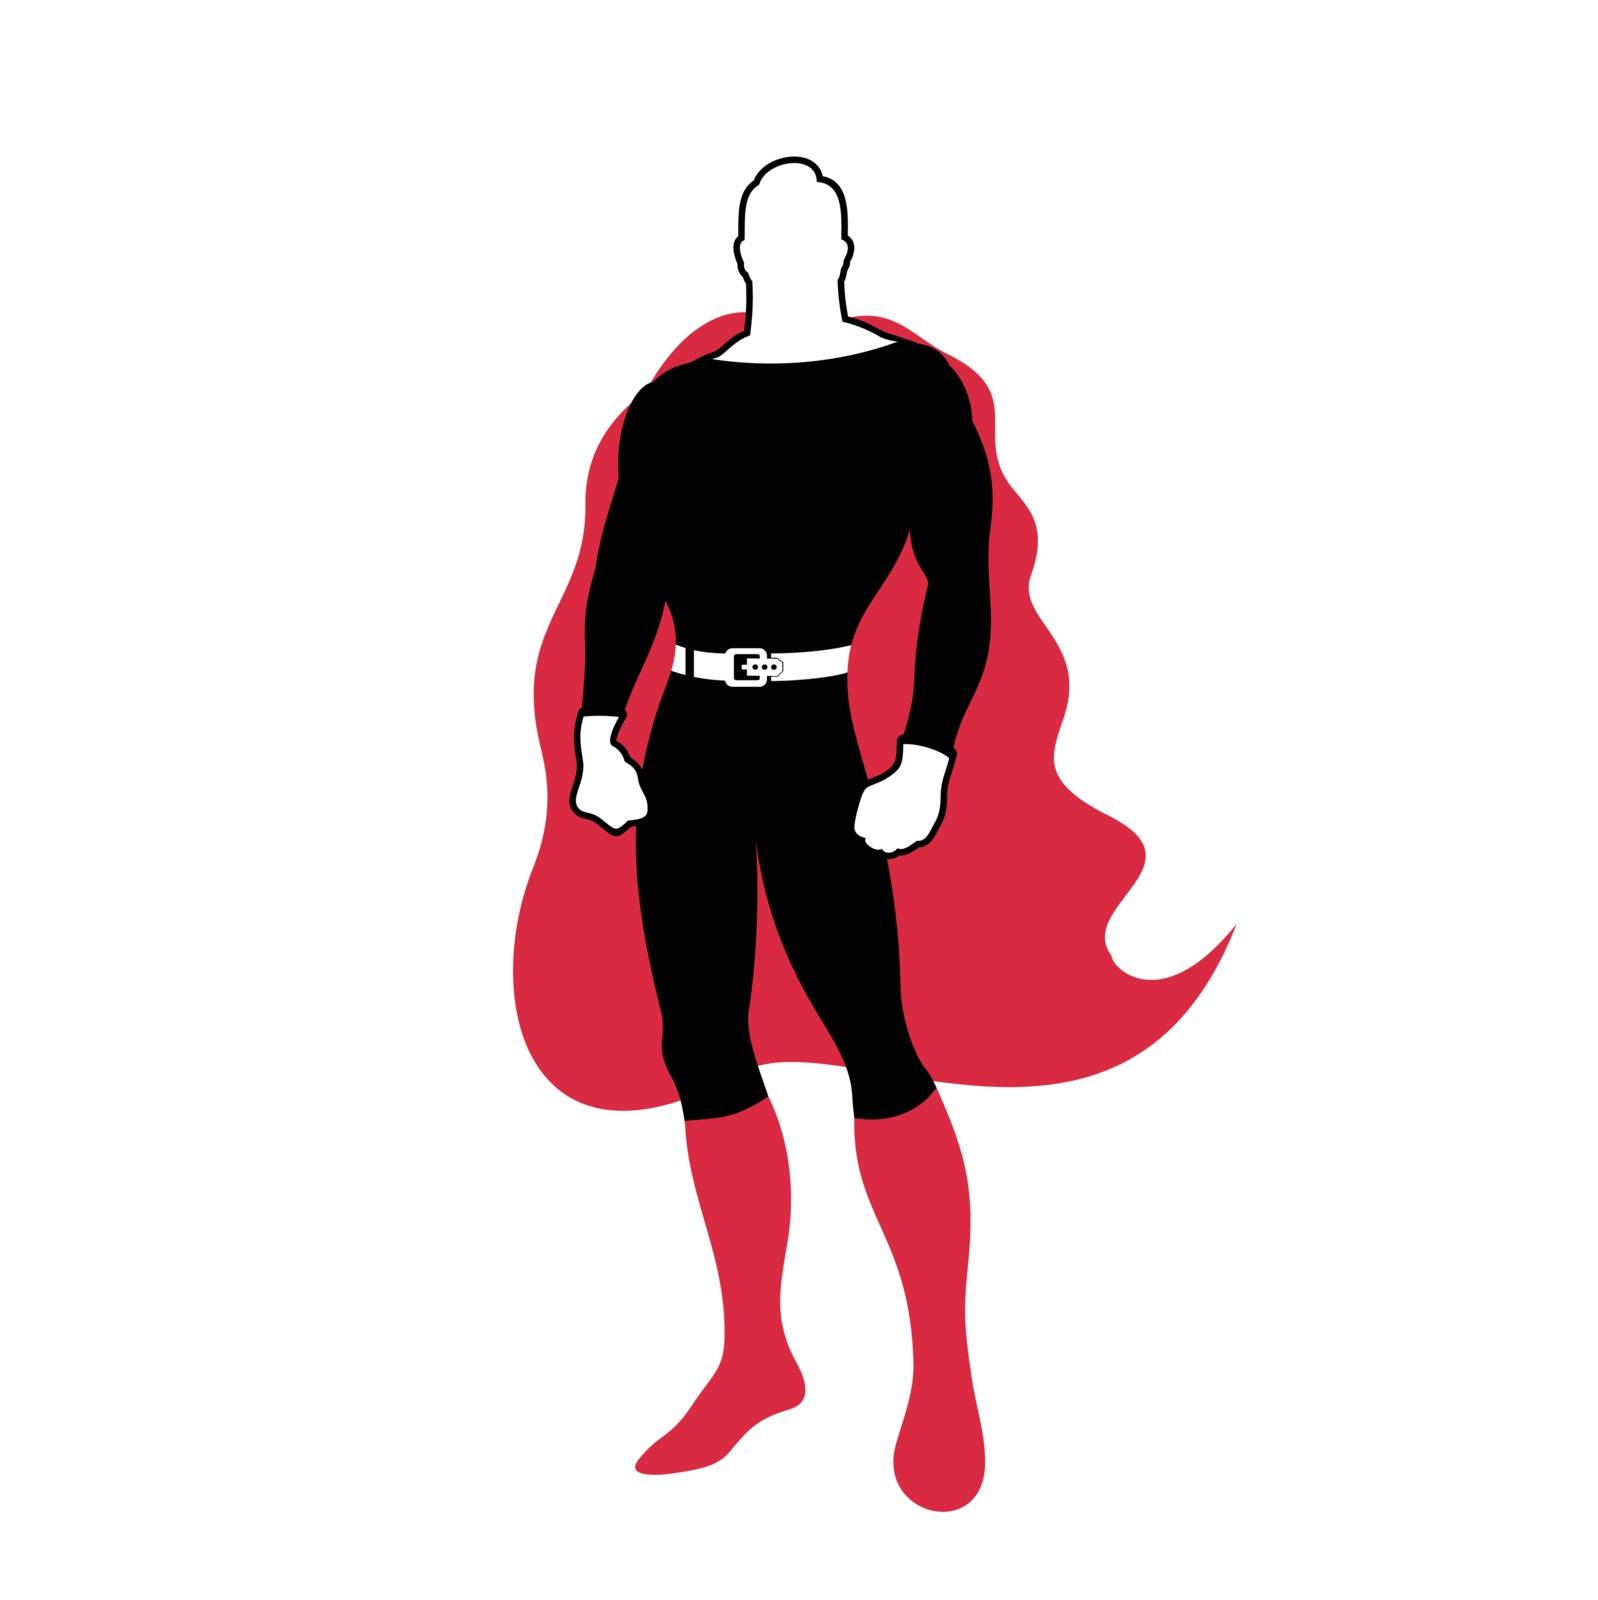 Character the super hero. A vector illustration